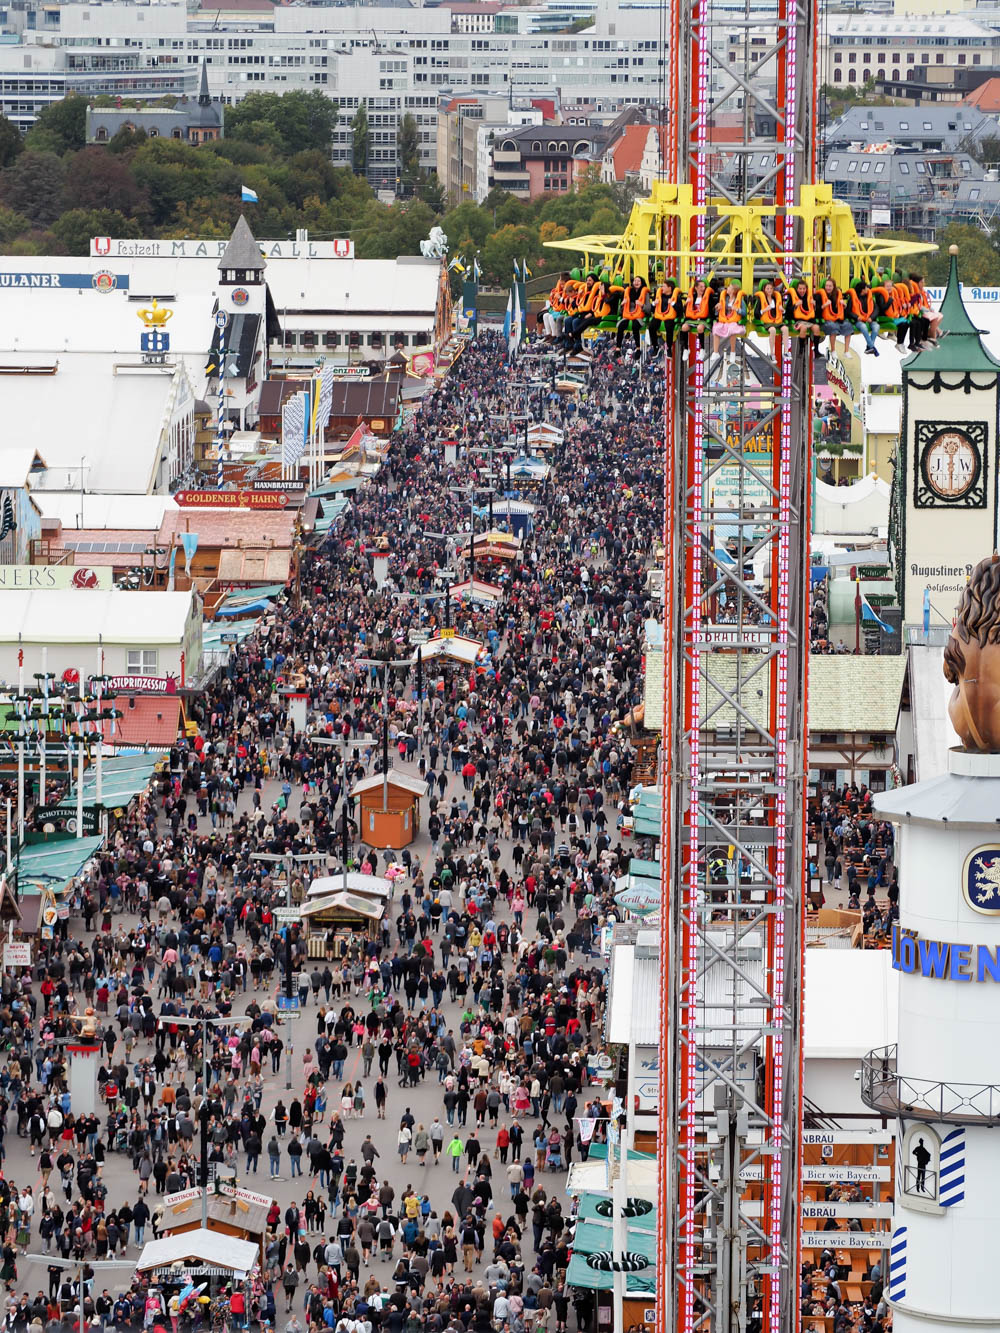 shot of large oktoberfest crowds from up high in the ferris wheel